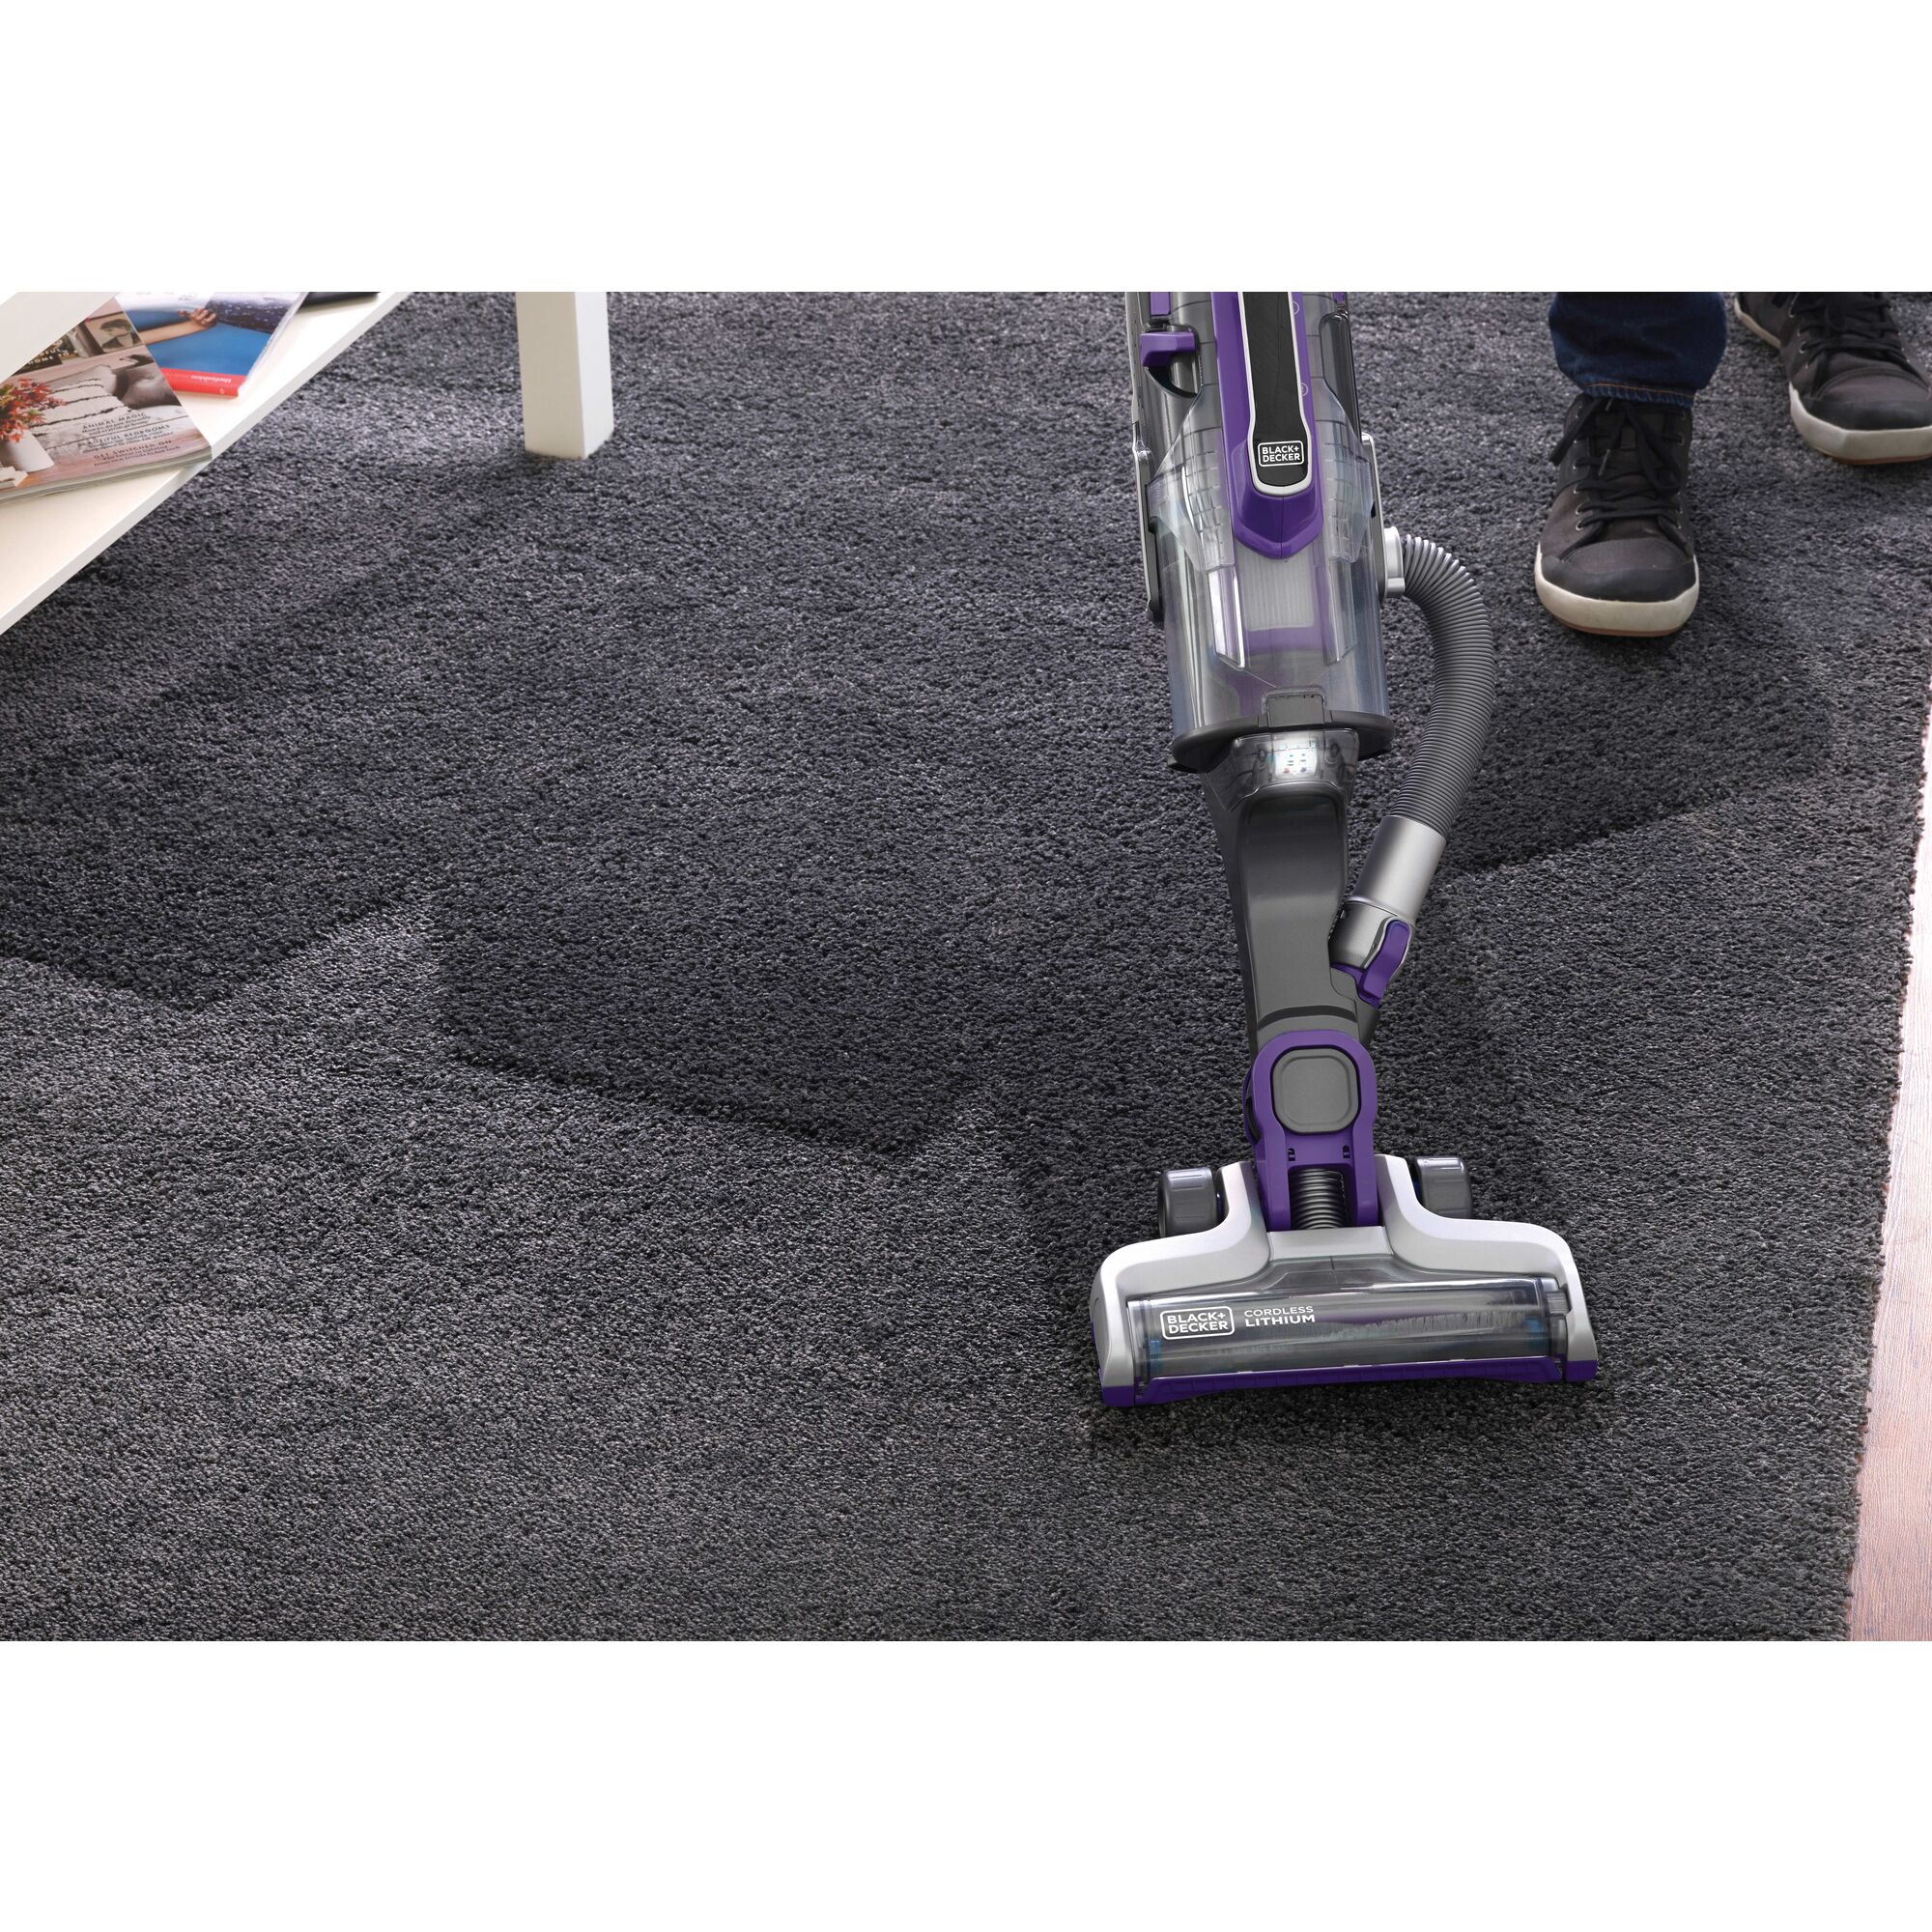 POWERSERIES PRO cordless 2 in 1 pet vacuum being used by a person to clean carpet.